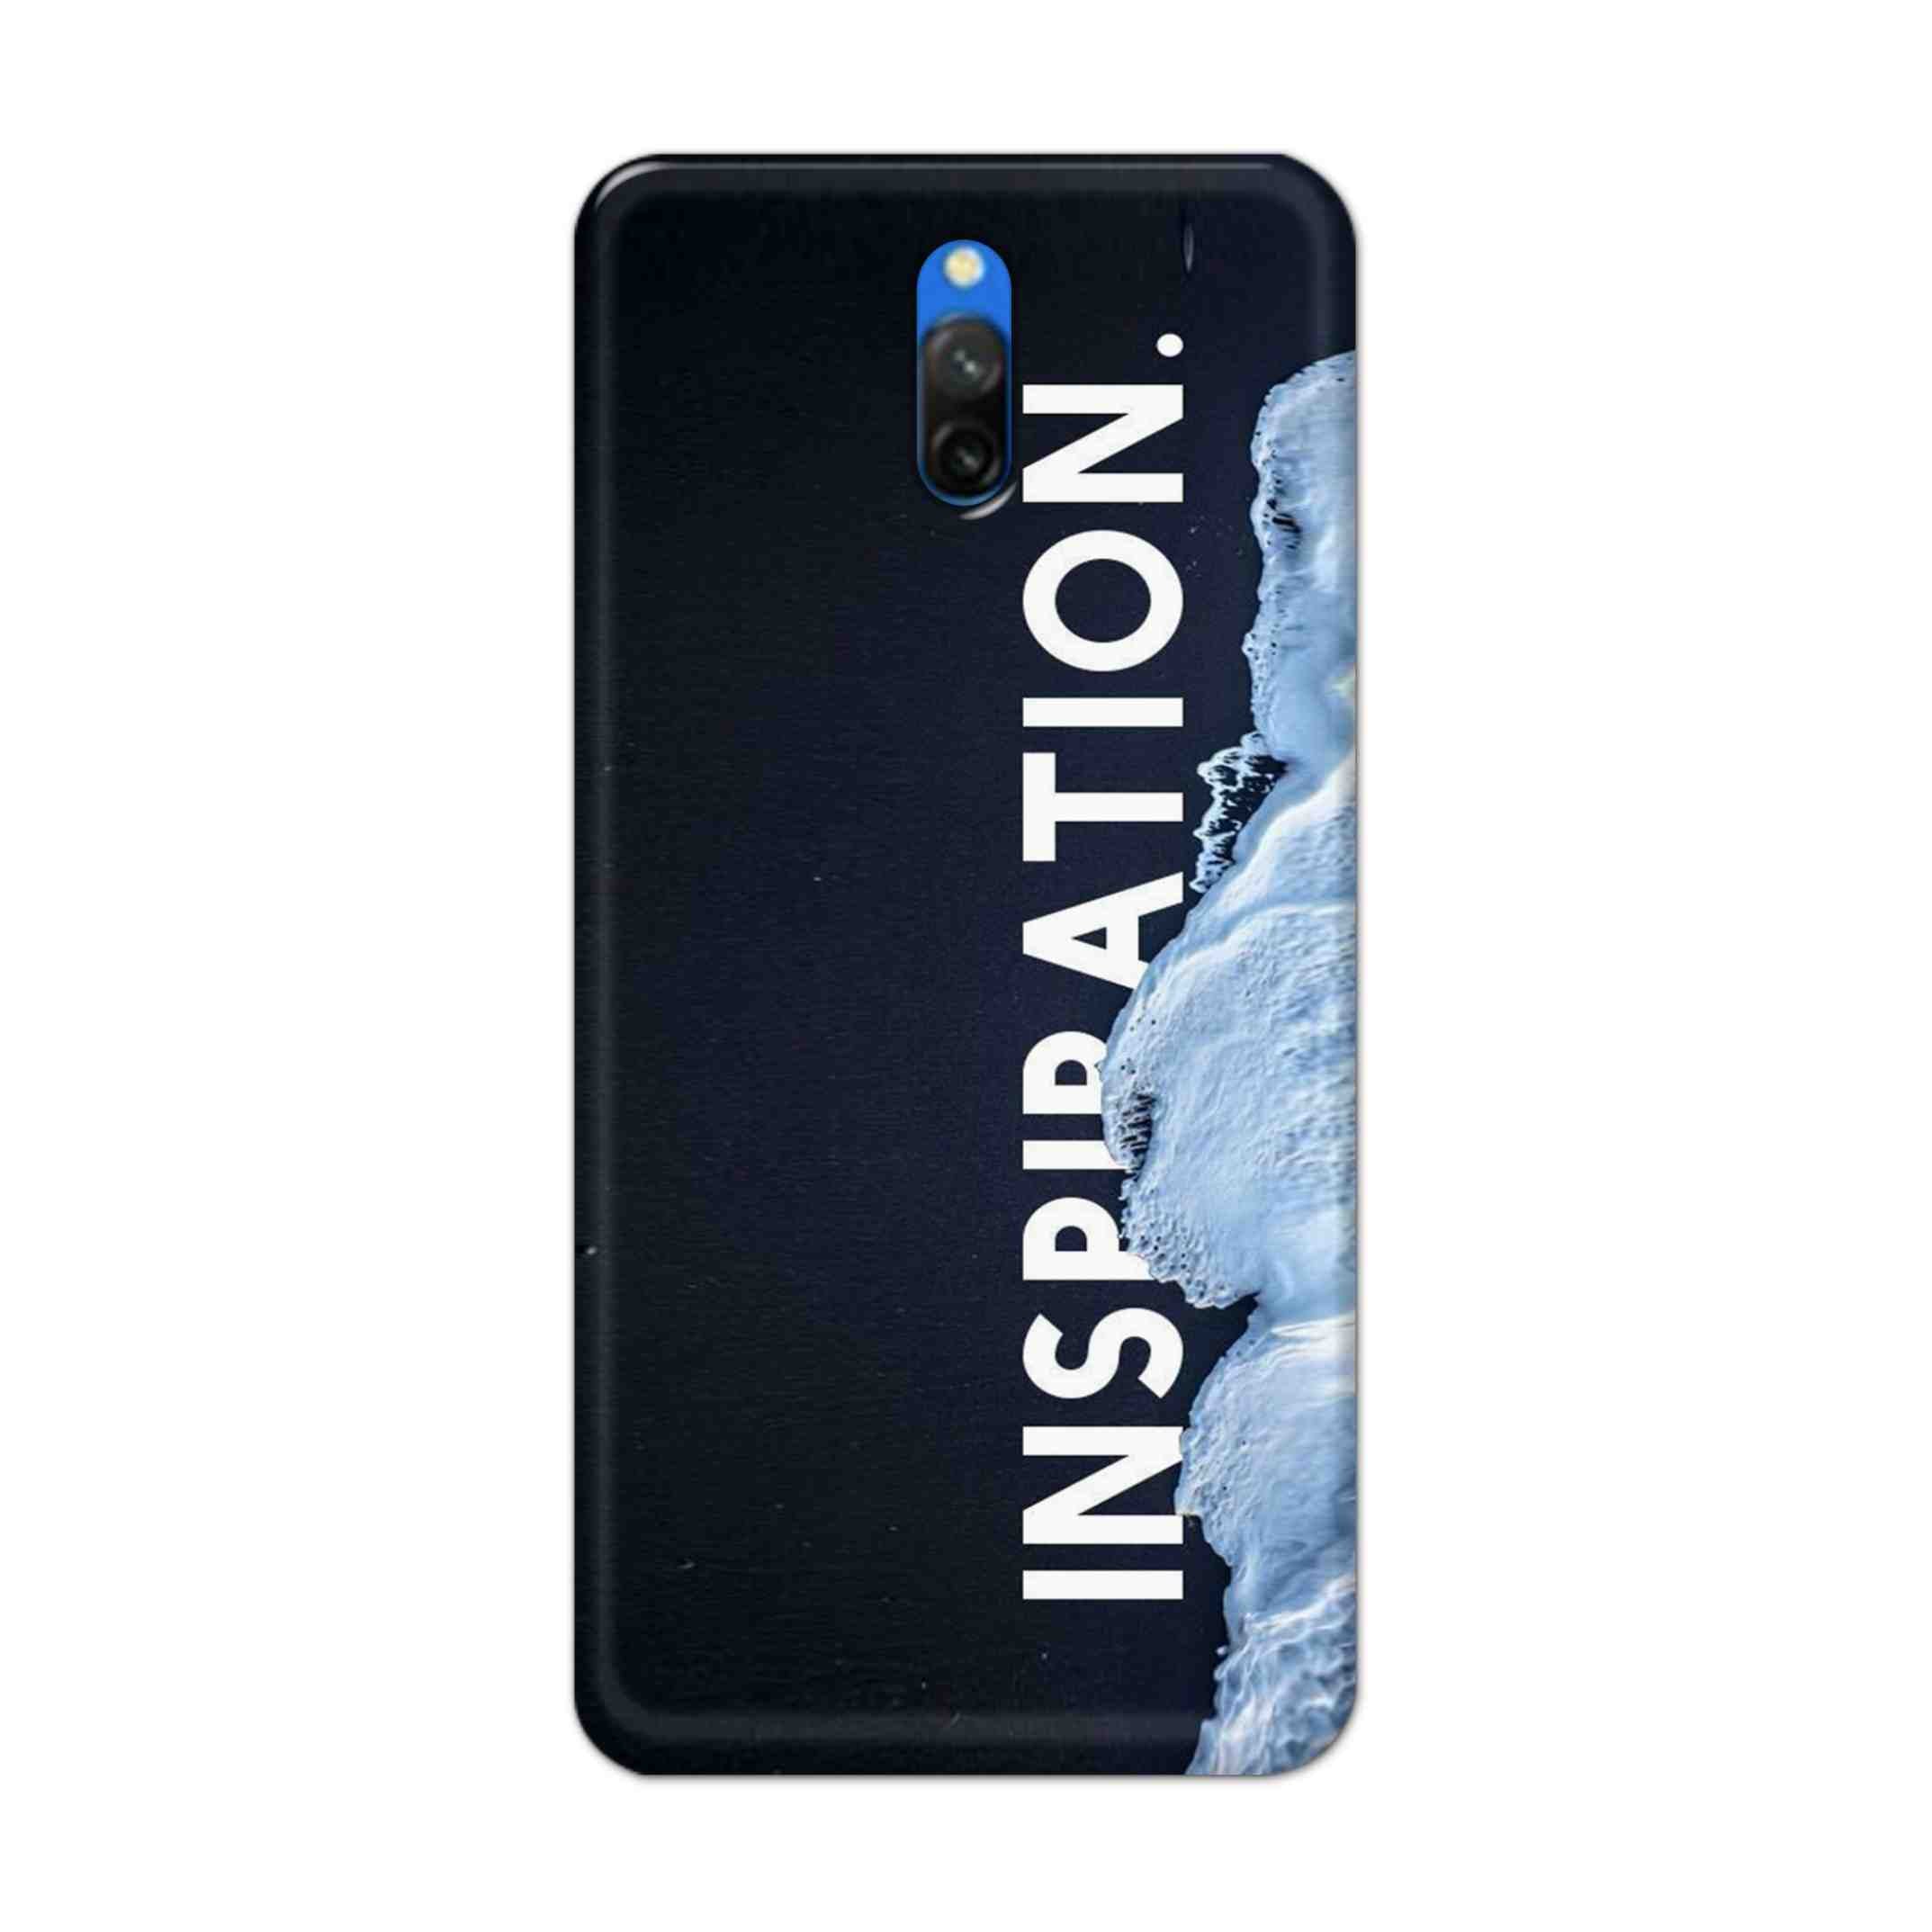 Buy Inspiration Hard Back Mobile Phone Case/Cover For Redmi 8A Dual Online